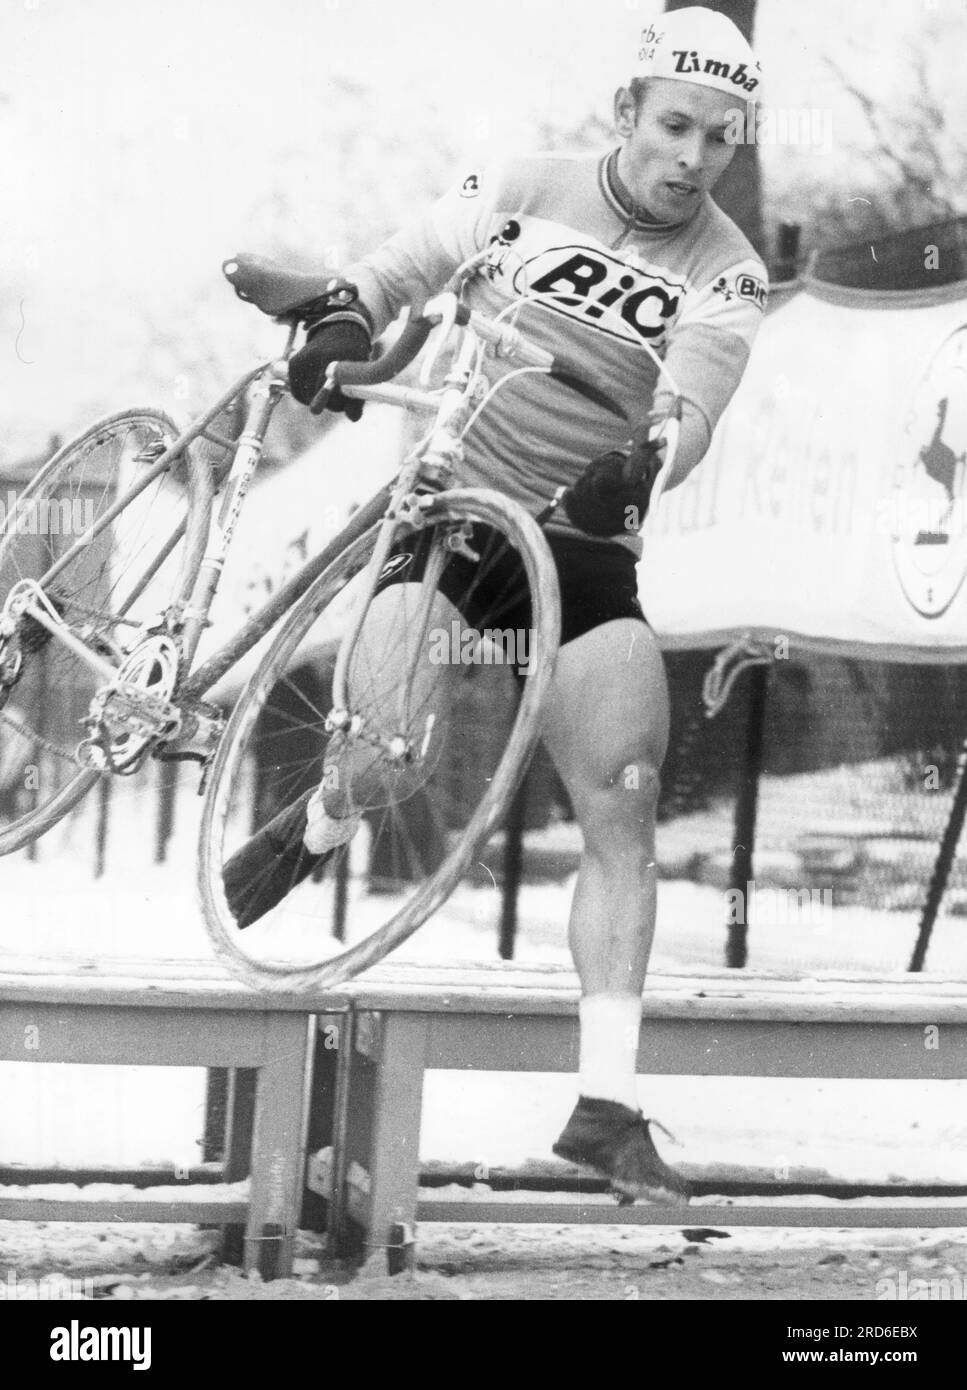 Wolfshohl, Rolf, * 27.12.1938, German athlete (racing cyclist), during cross-country race, 1969, ADDITIONAL-RIGHTS-CLEARANCE-INFO-NOT-AVAILABLE Stock Photo